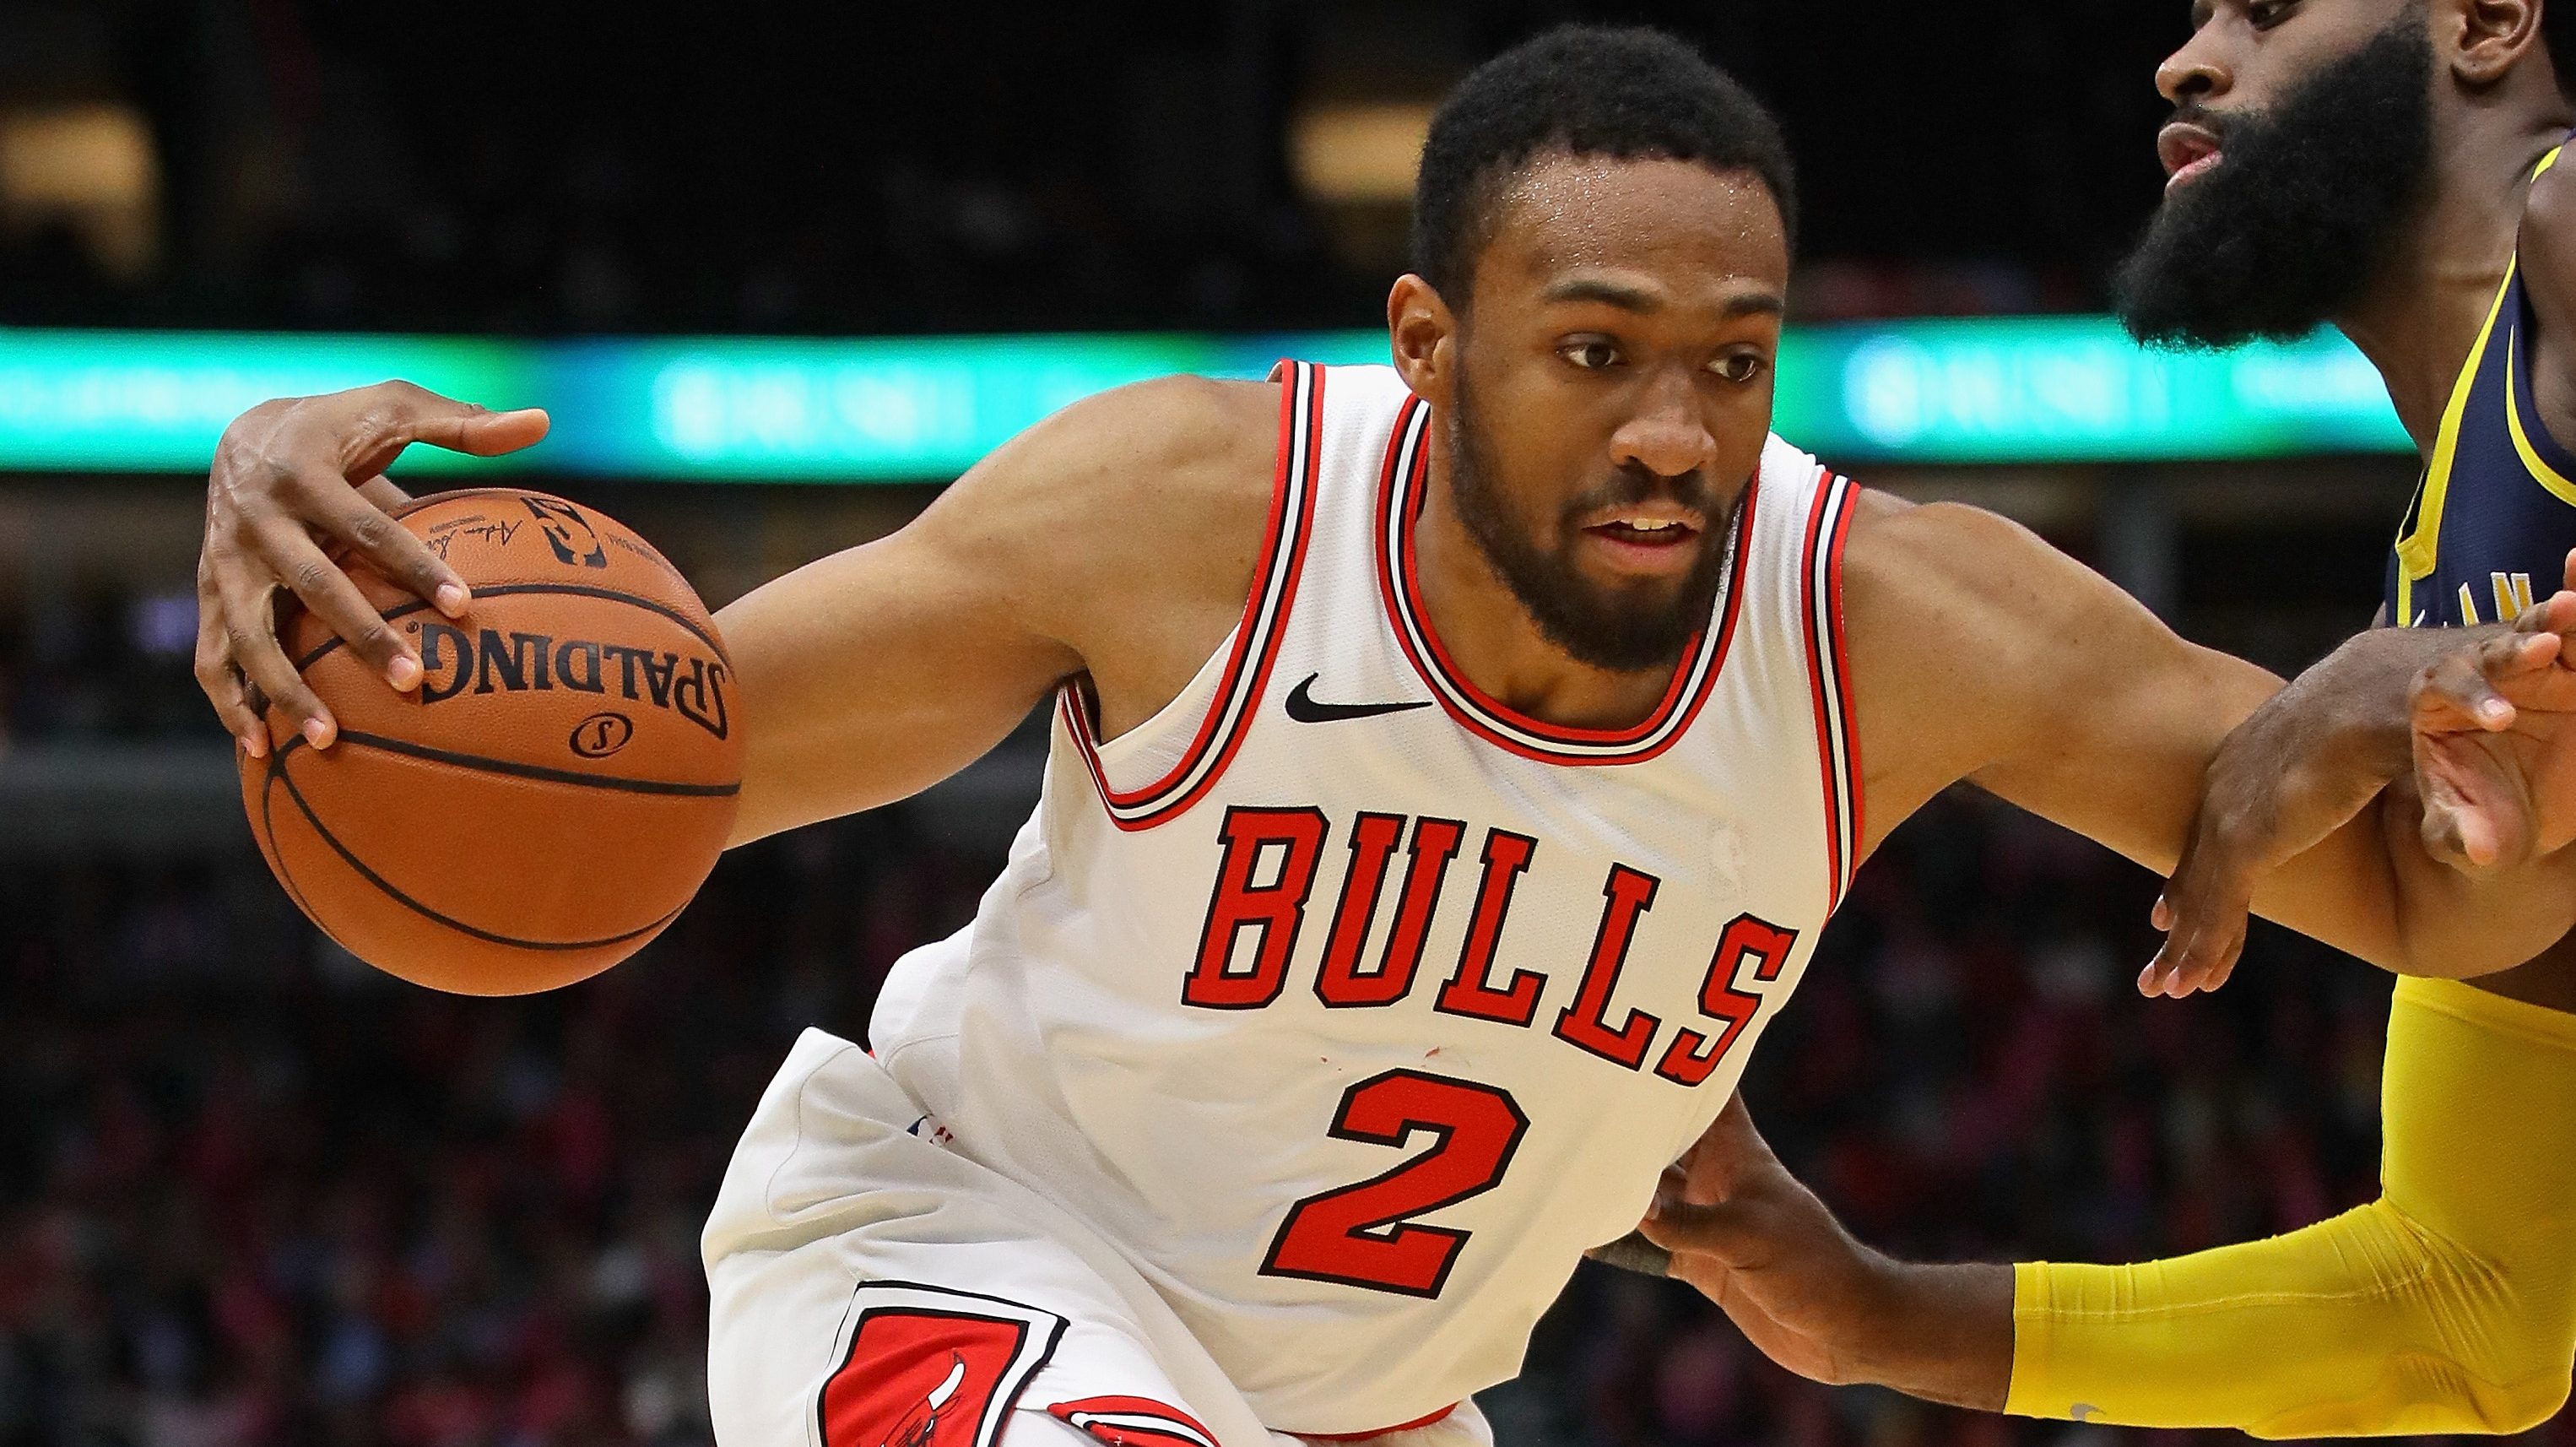 Jabari Parker 5 Fast Facts You Need to Know